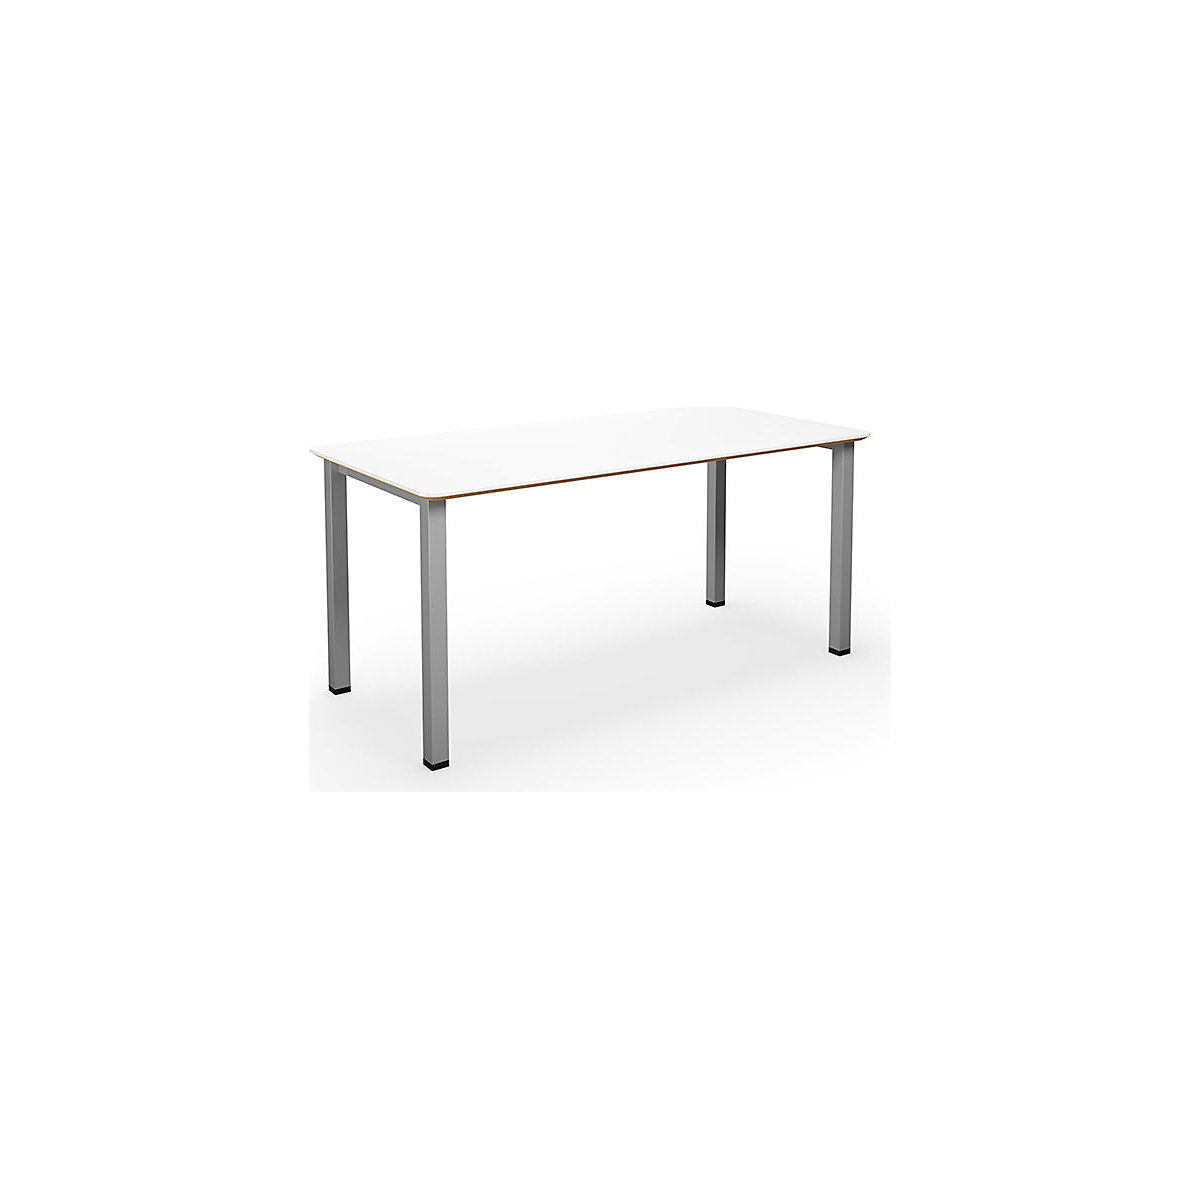 DUO-U Trend multi-purpose desk, straight tabletop, rounded corners, WxD 1400 x 800 mm, white, silver-1